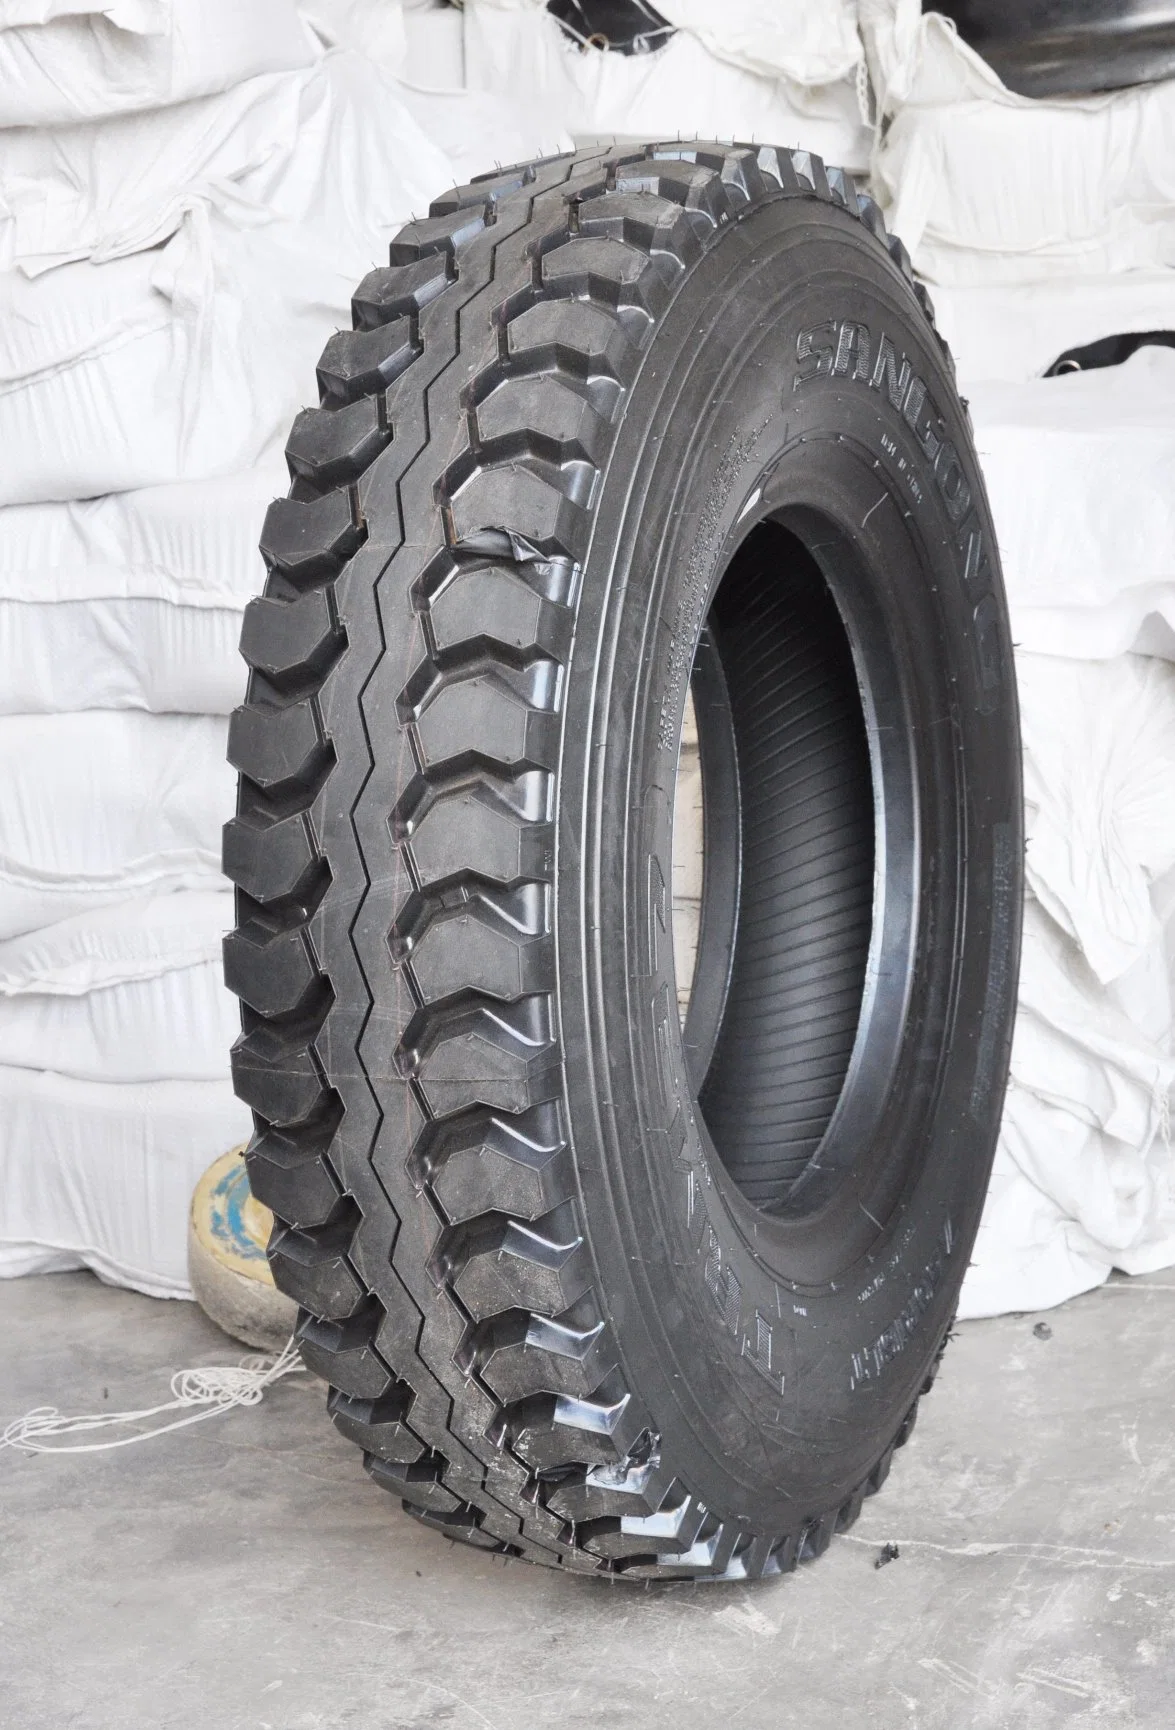 TBR Truck Tyre with 9.00r20 Trm37 Radial Tube Truck Tire